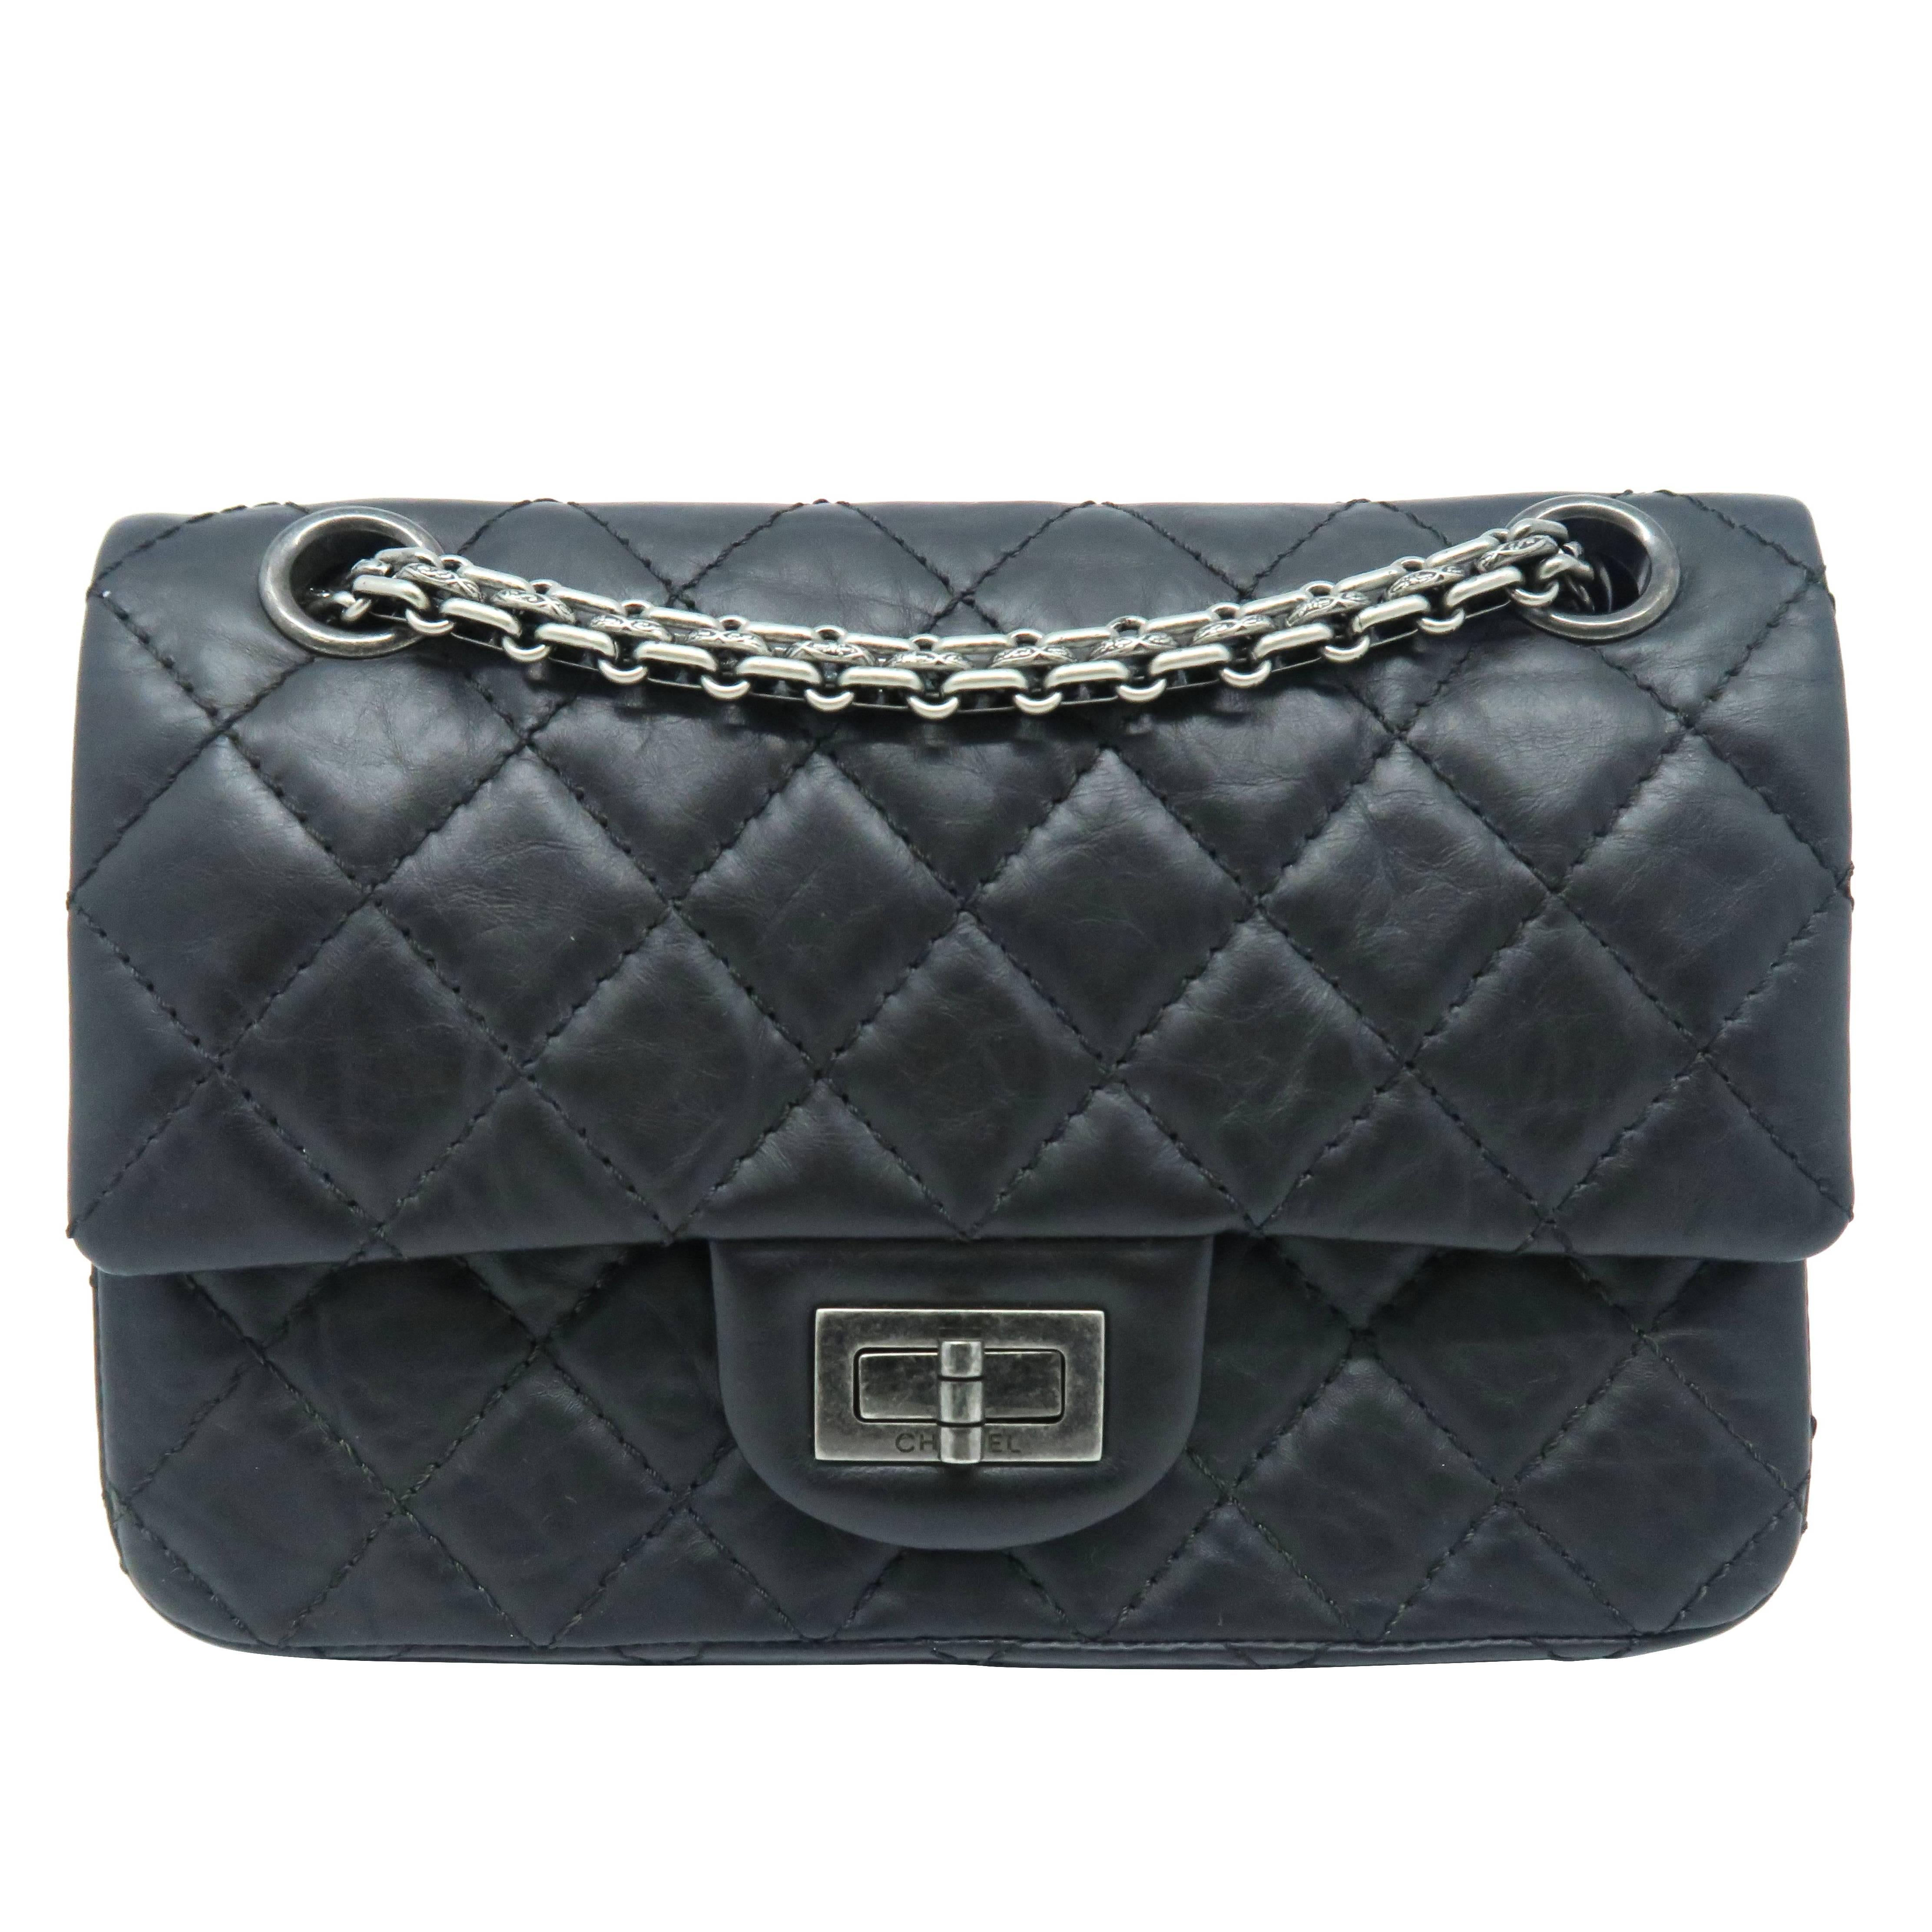 Chanel Black Quilting Calfskin Leather Silver Metal Flap Bag For Sale